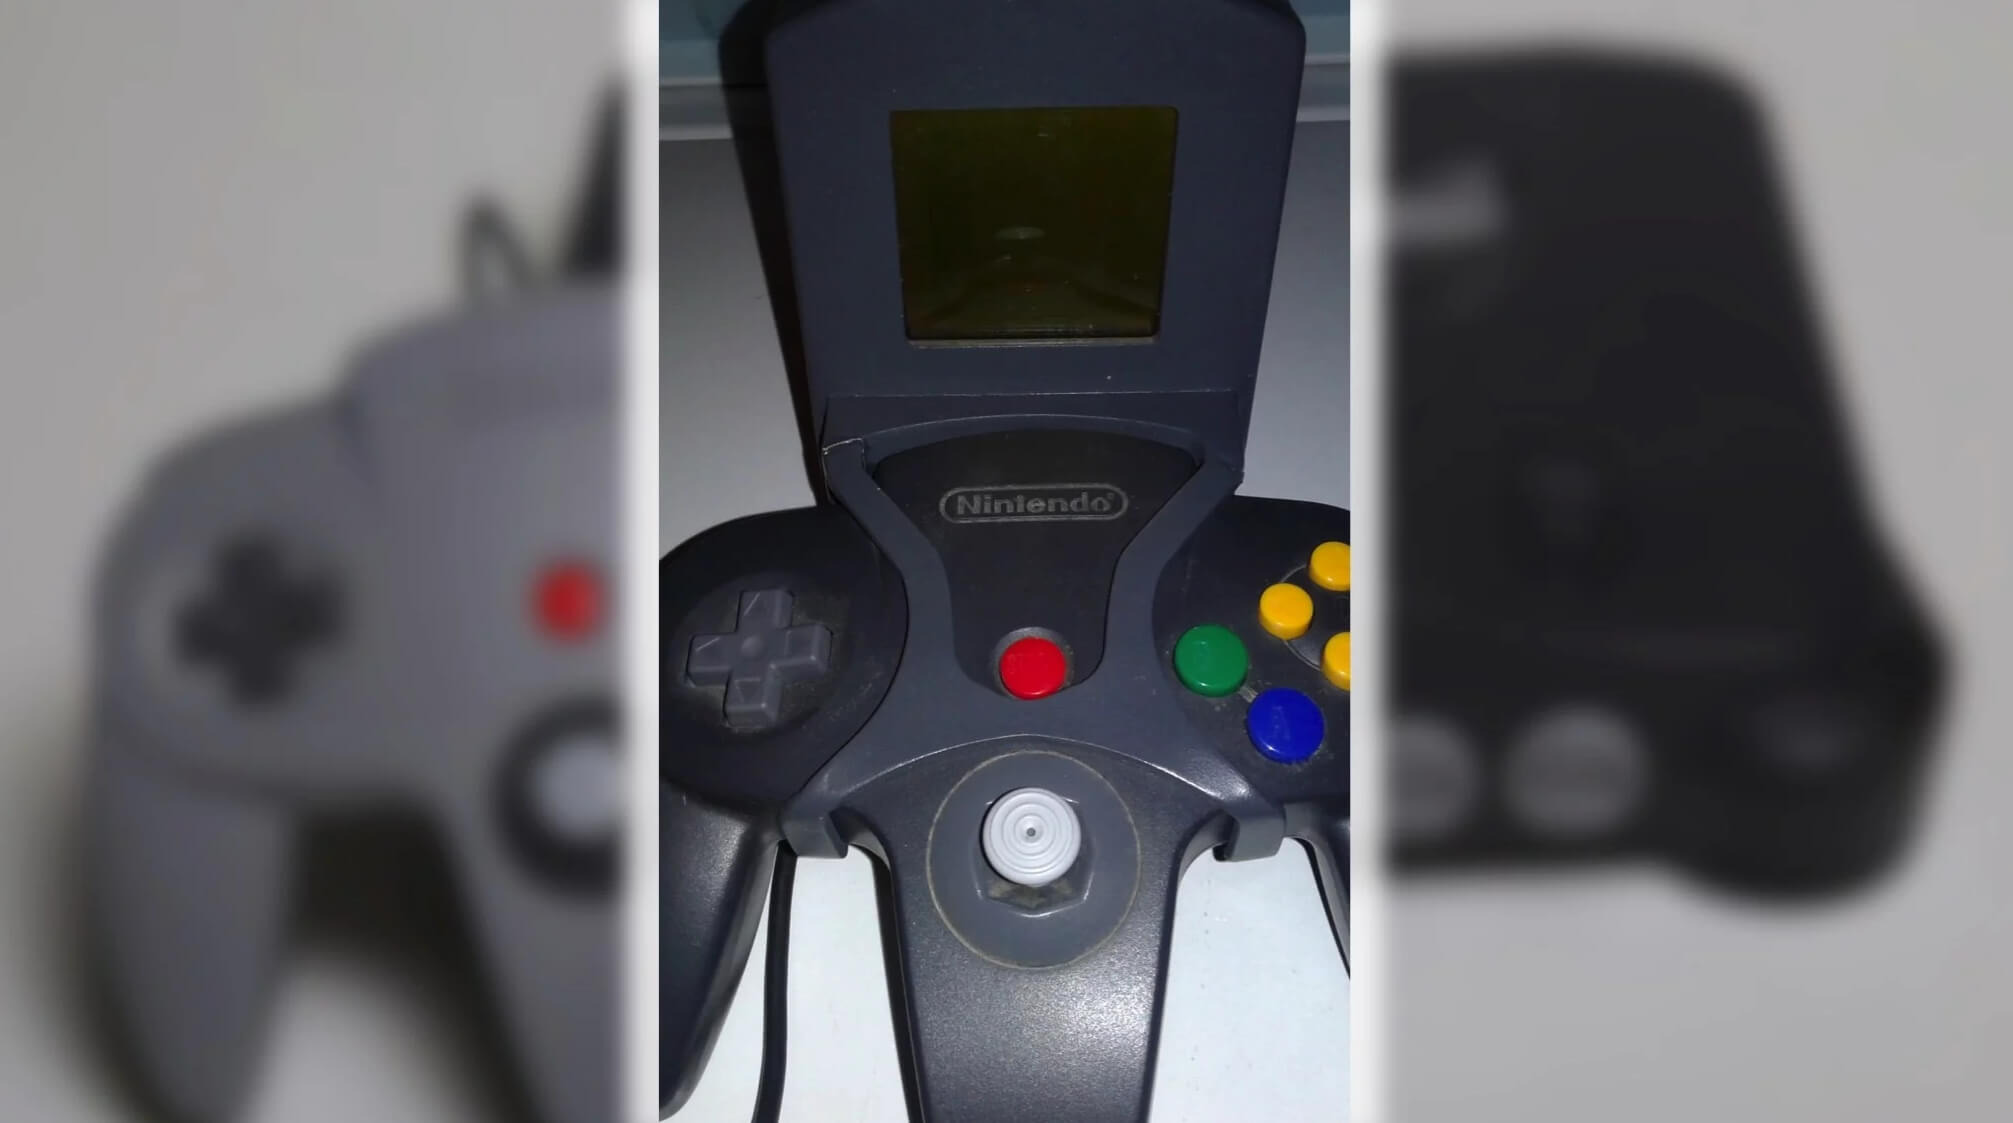 Did Sega steal the idea for its Dreamcast VMU from this N64 prototype accessory?